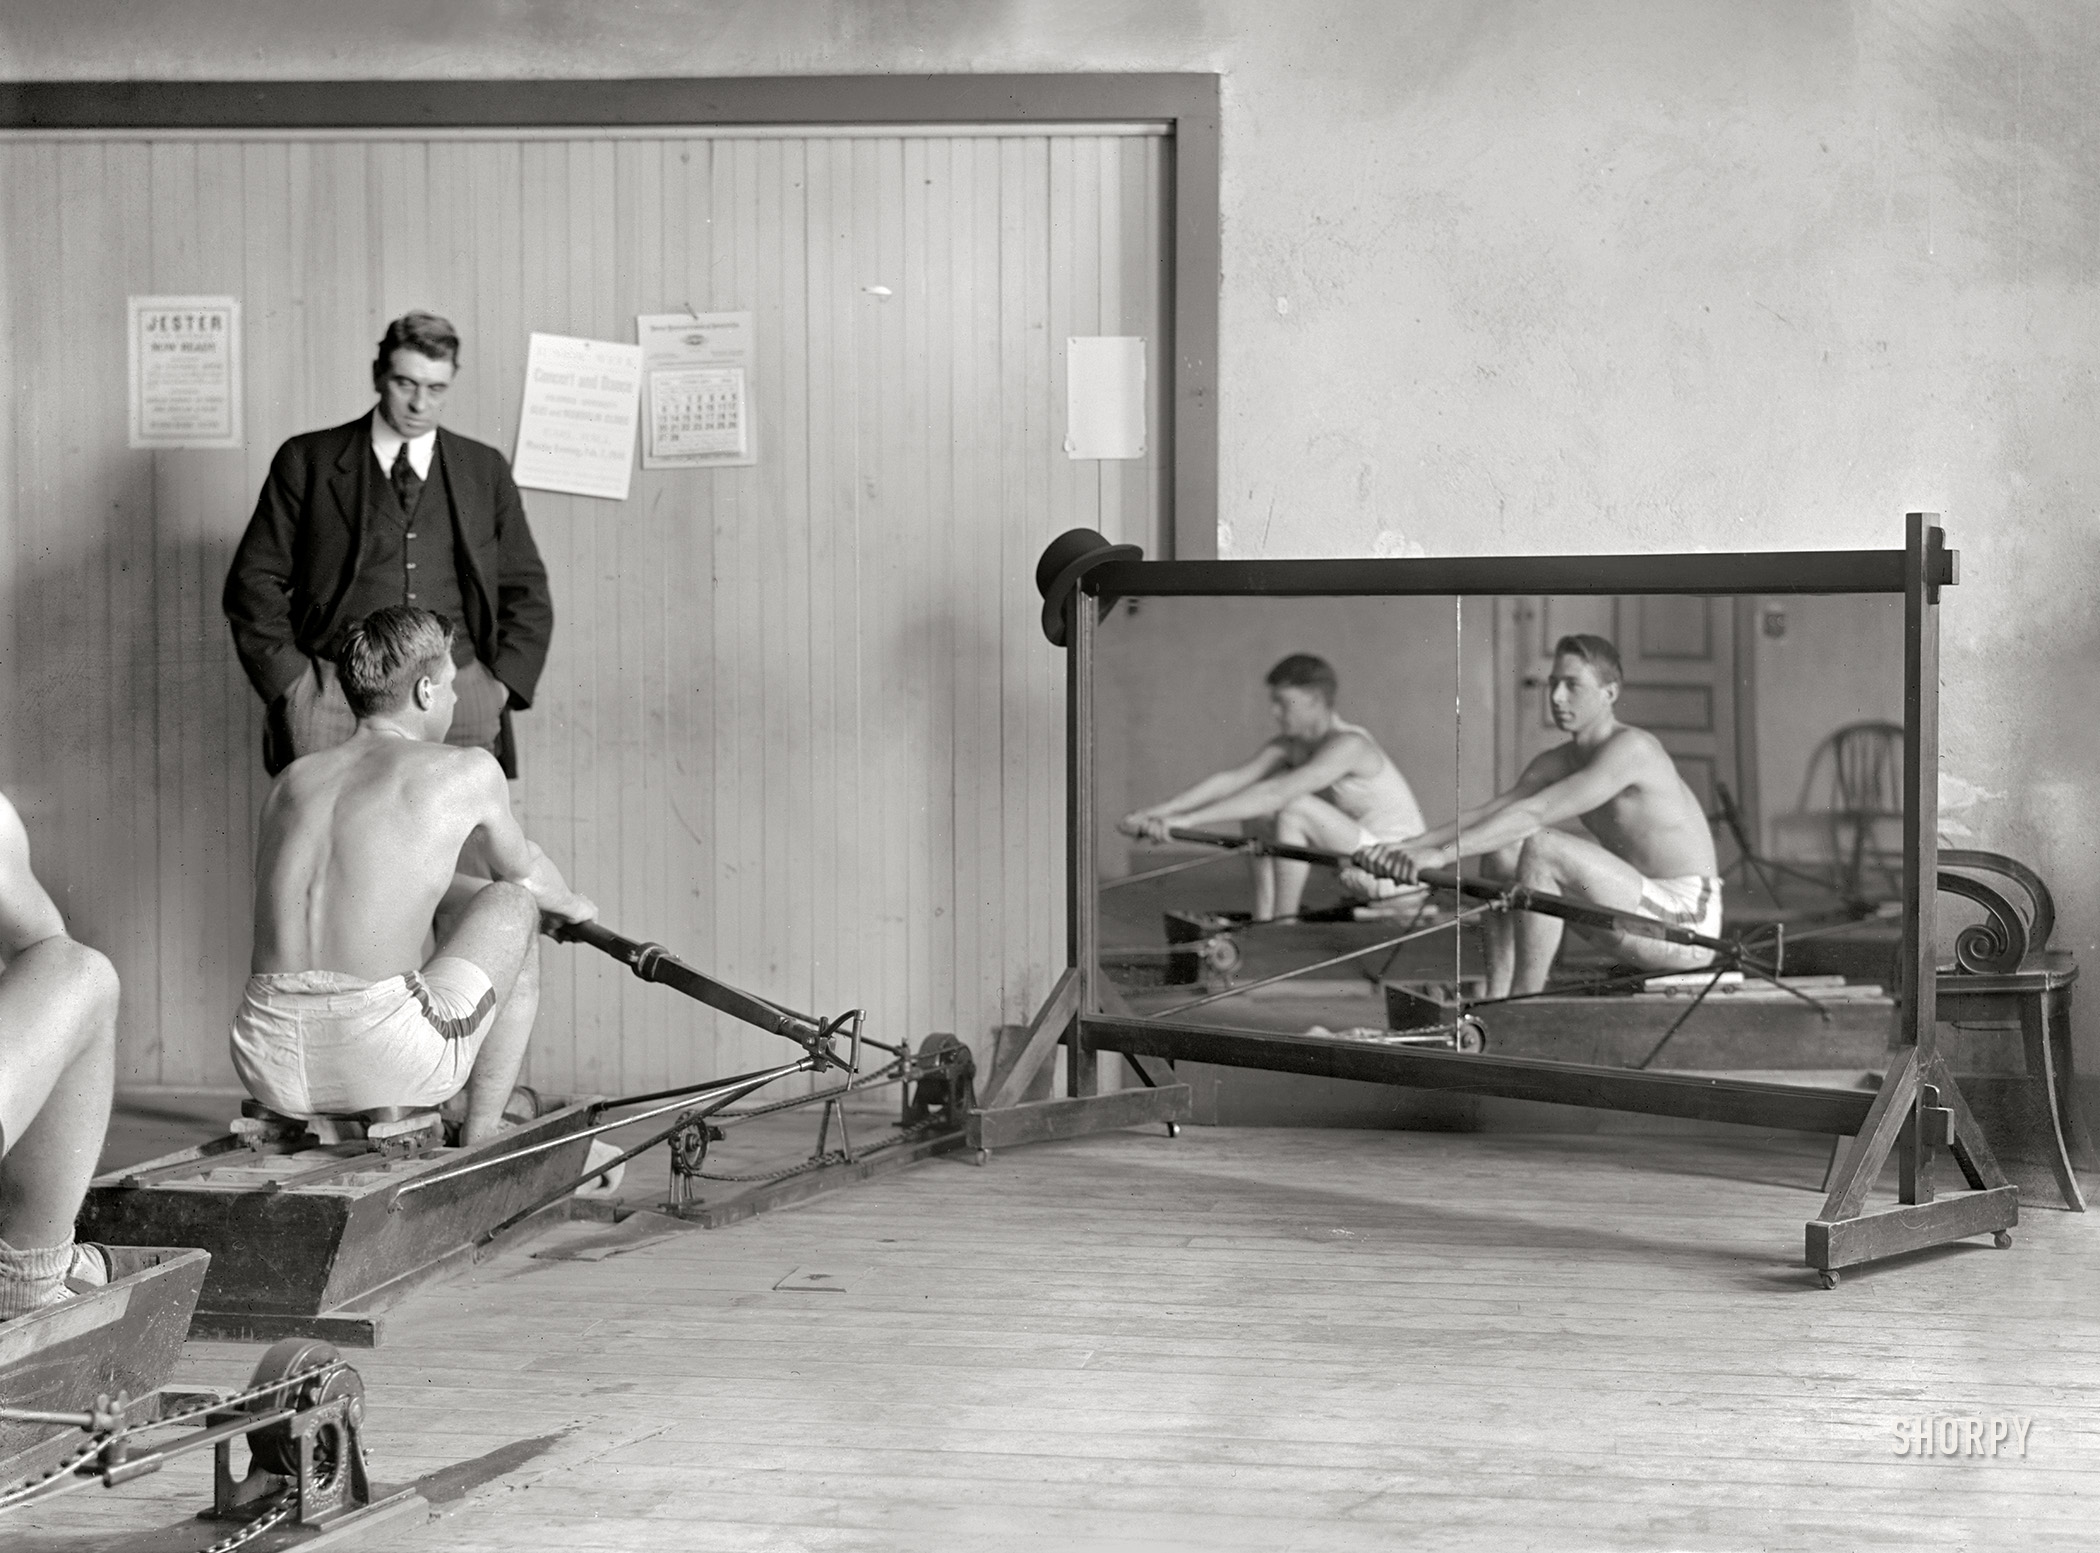 February 1910. New York. "Columbia rowing team in mock shells training in crew house with coach Jim Rice." 5x7 inch glass negative, Bain News Service. View full size.